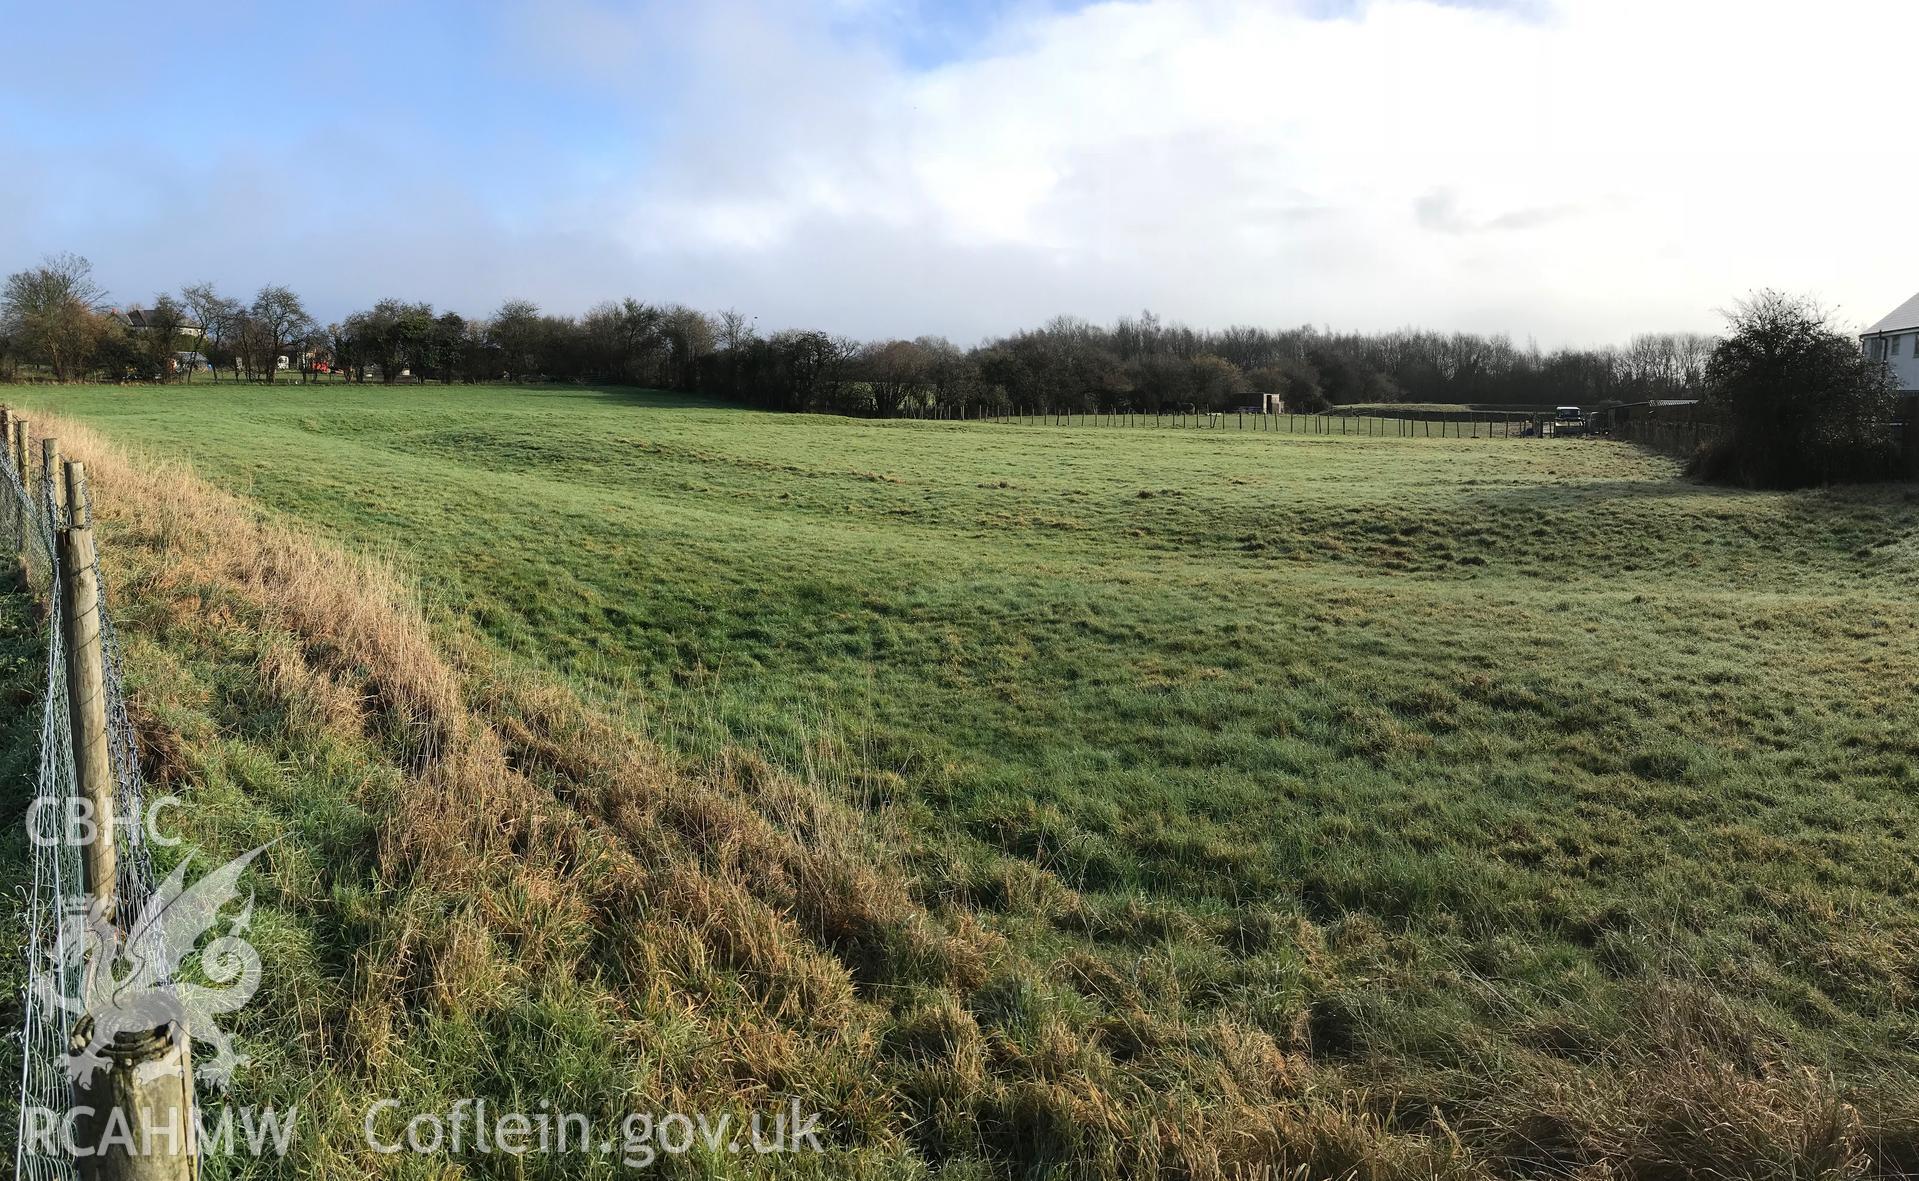 Digital colour photograph of Courtfield moated site on the eastern side of Undy, Newport, taken by Paul R. Davis on 4th February 2019.